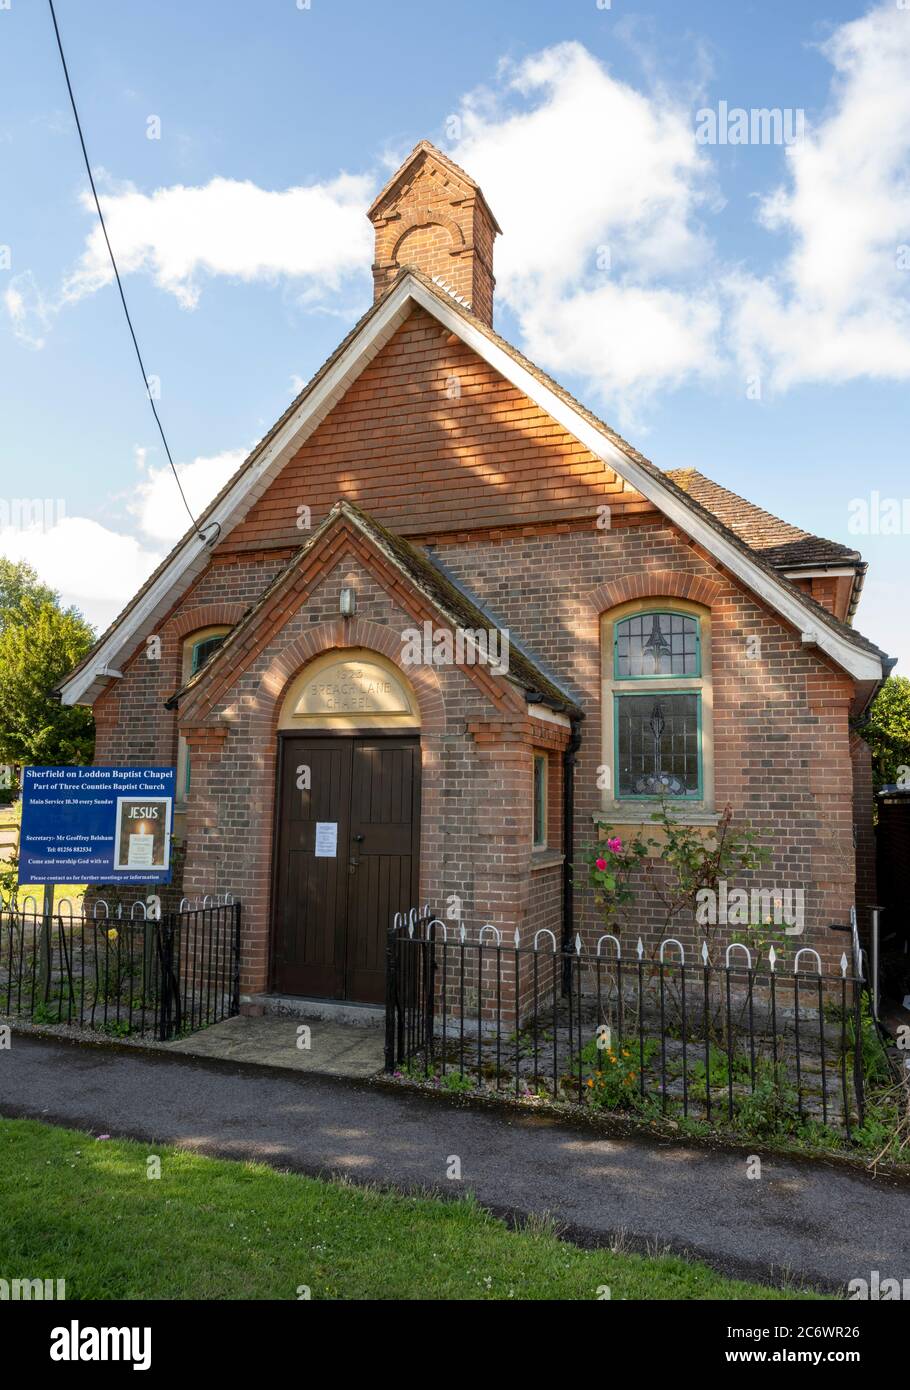 View of Baptist Chapel ( formally Breach Lane Chapel built in 1923) at Sherfield-on-Loddon, Hampshire, England, UK Stock Photo